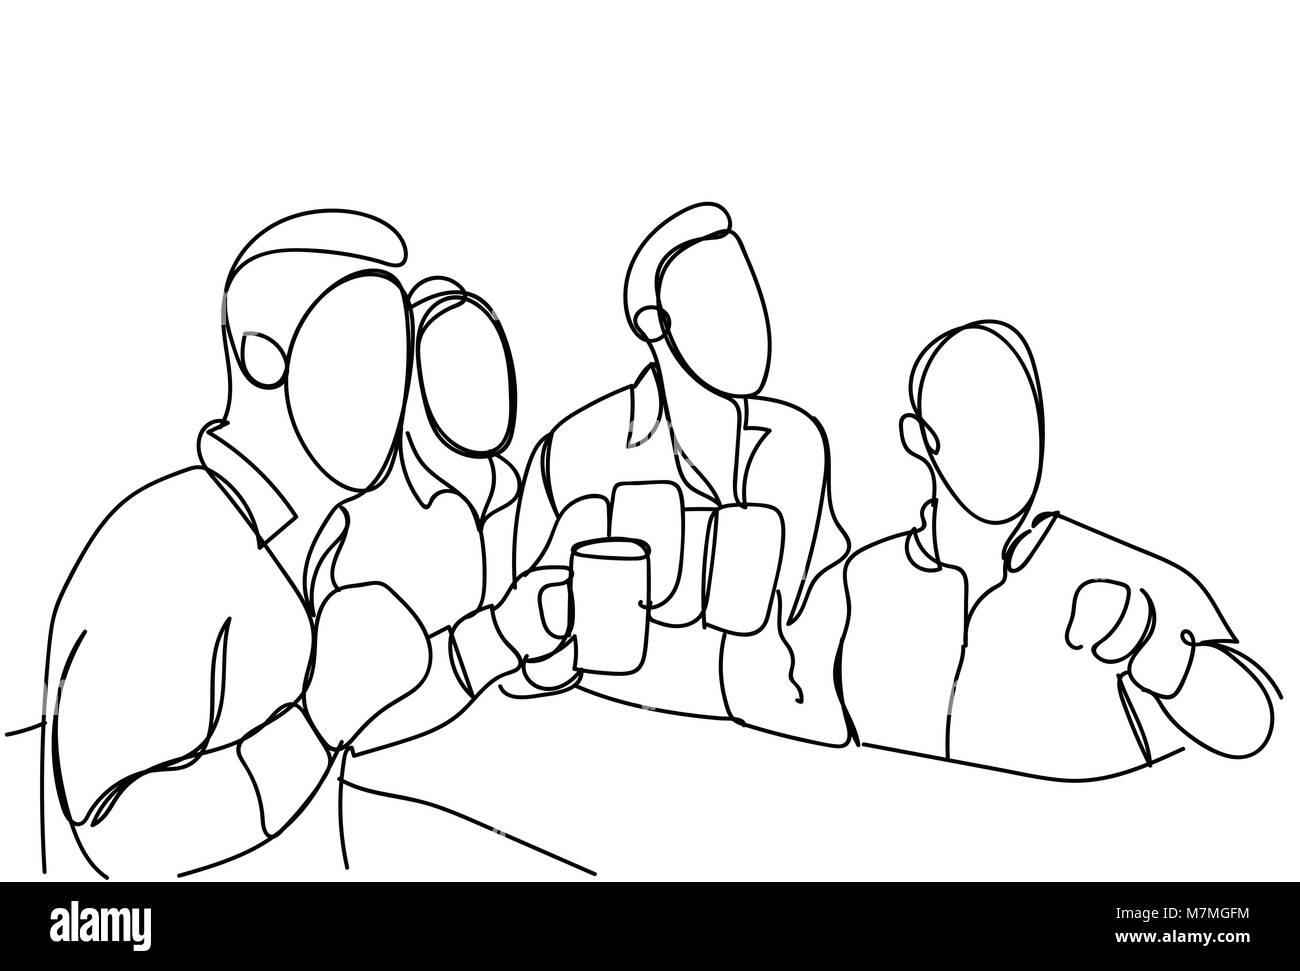 Group Of Sketch Men Drinking Beer Hold Glasses Doodle Male In Pub Or Bar Concept Toasting Party Or Celebration Stock Vector